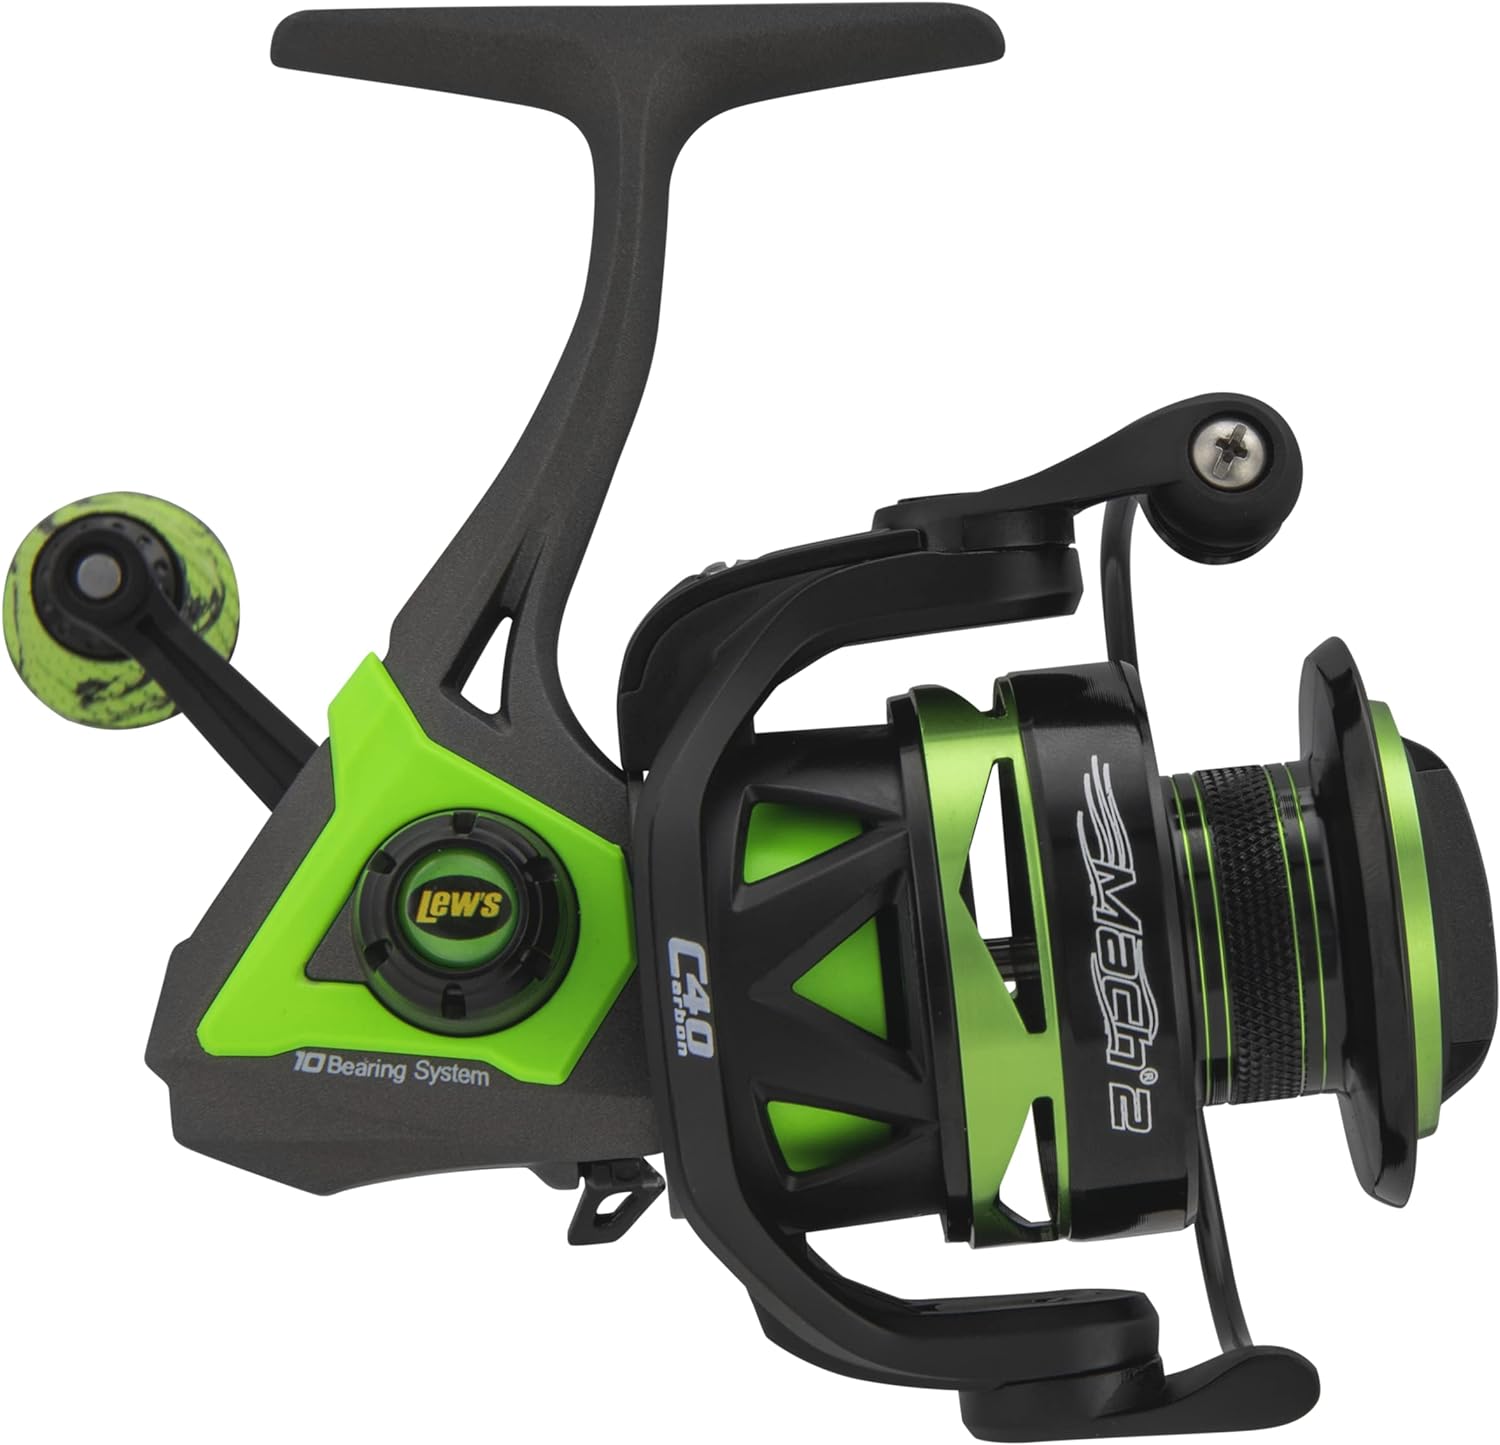 Lew's Mach 2 Spinning Reel: A High-Quality Fishing Reel for Anglers